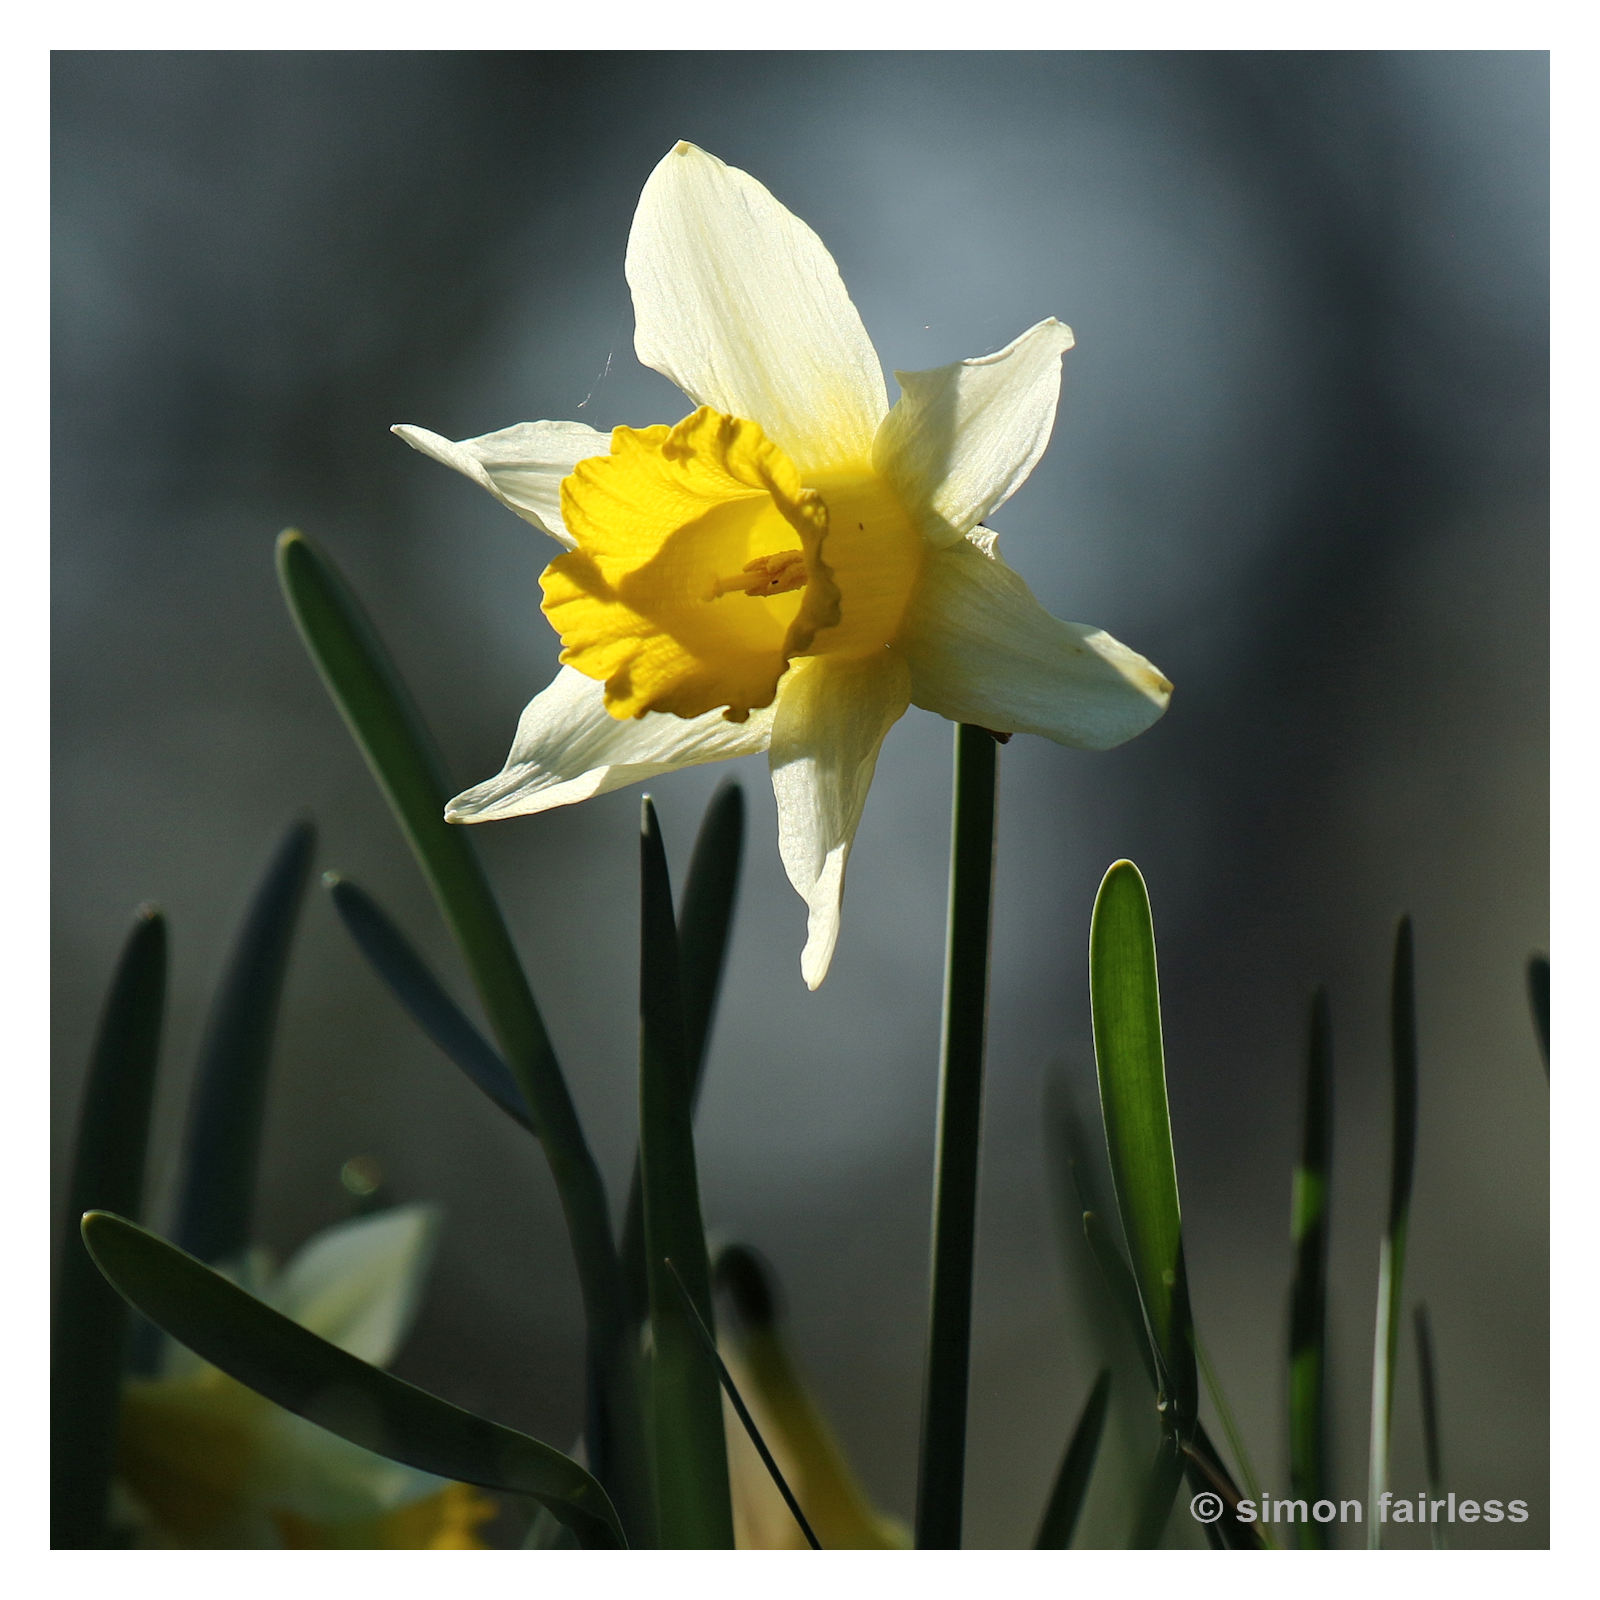 Floral Image of daffodil